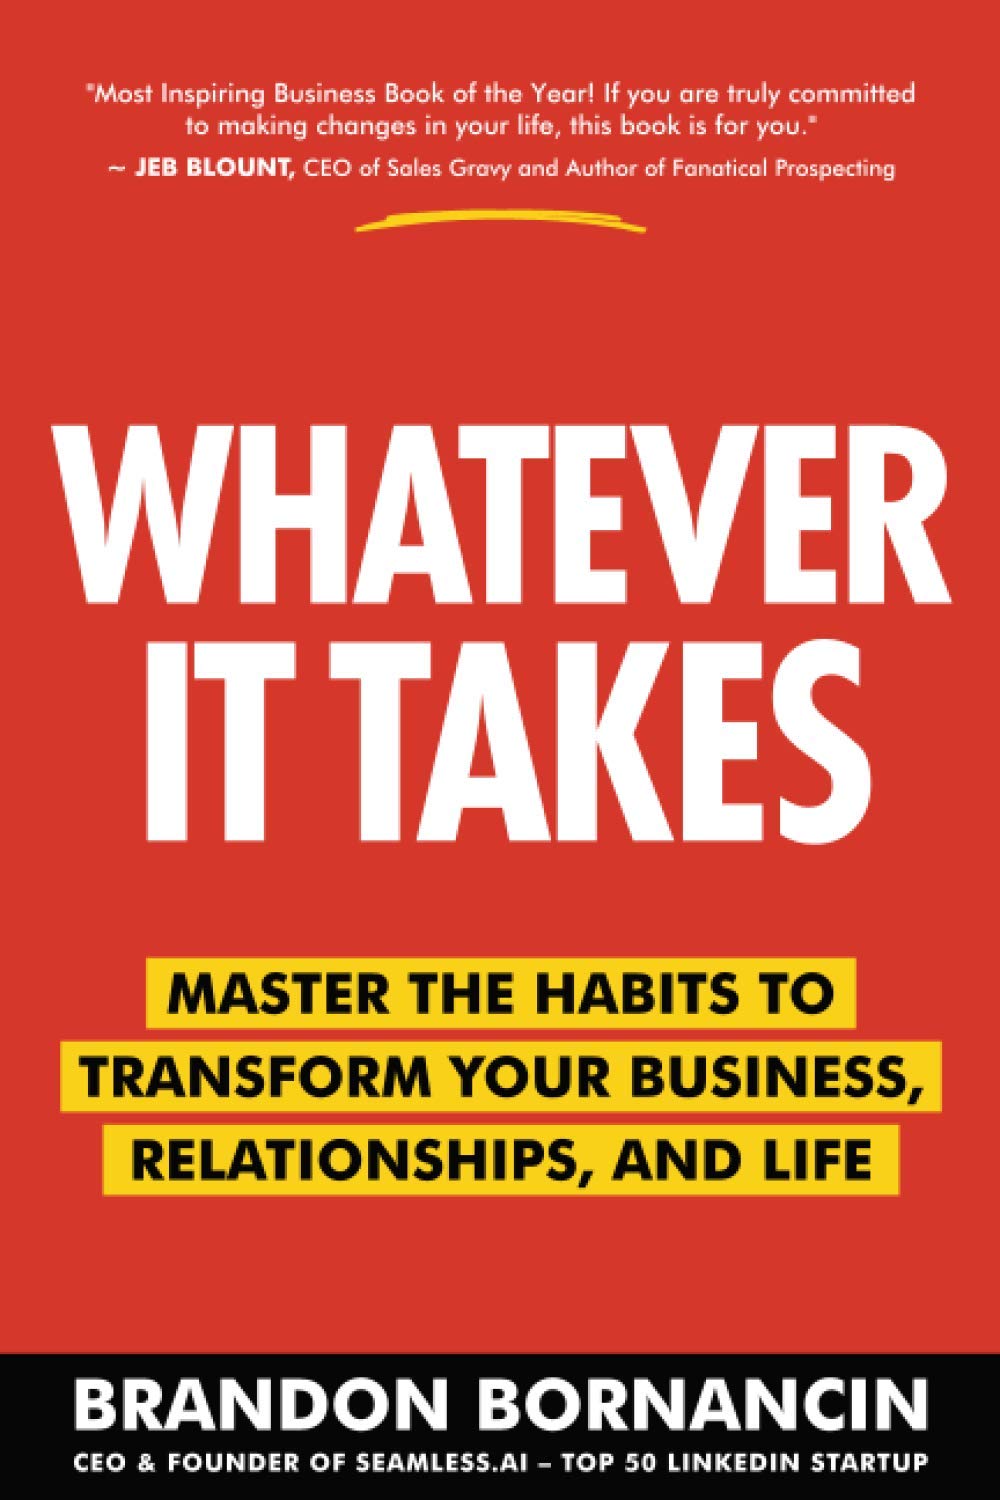 Whatever It Takes: Master the Habits to Transform Your Business, Relationships, and Life